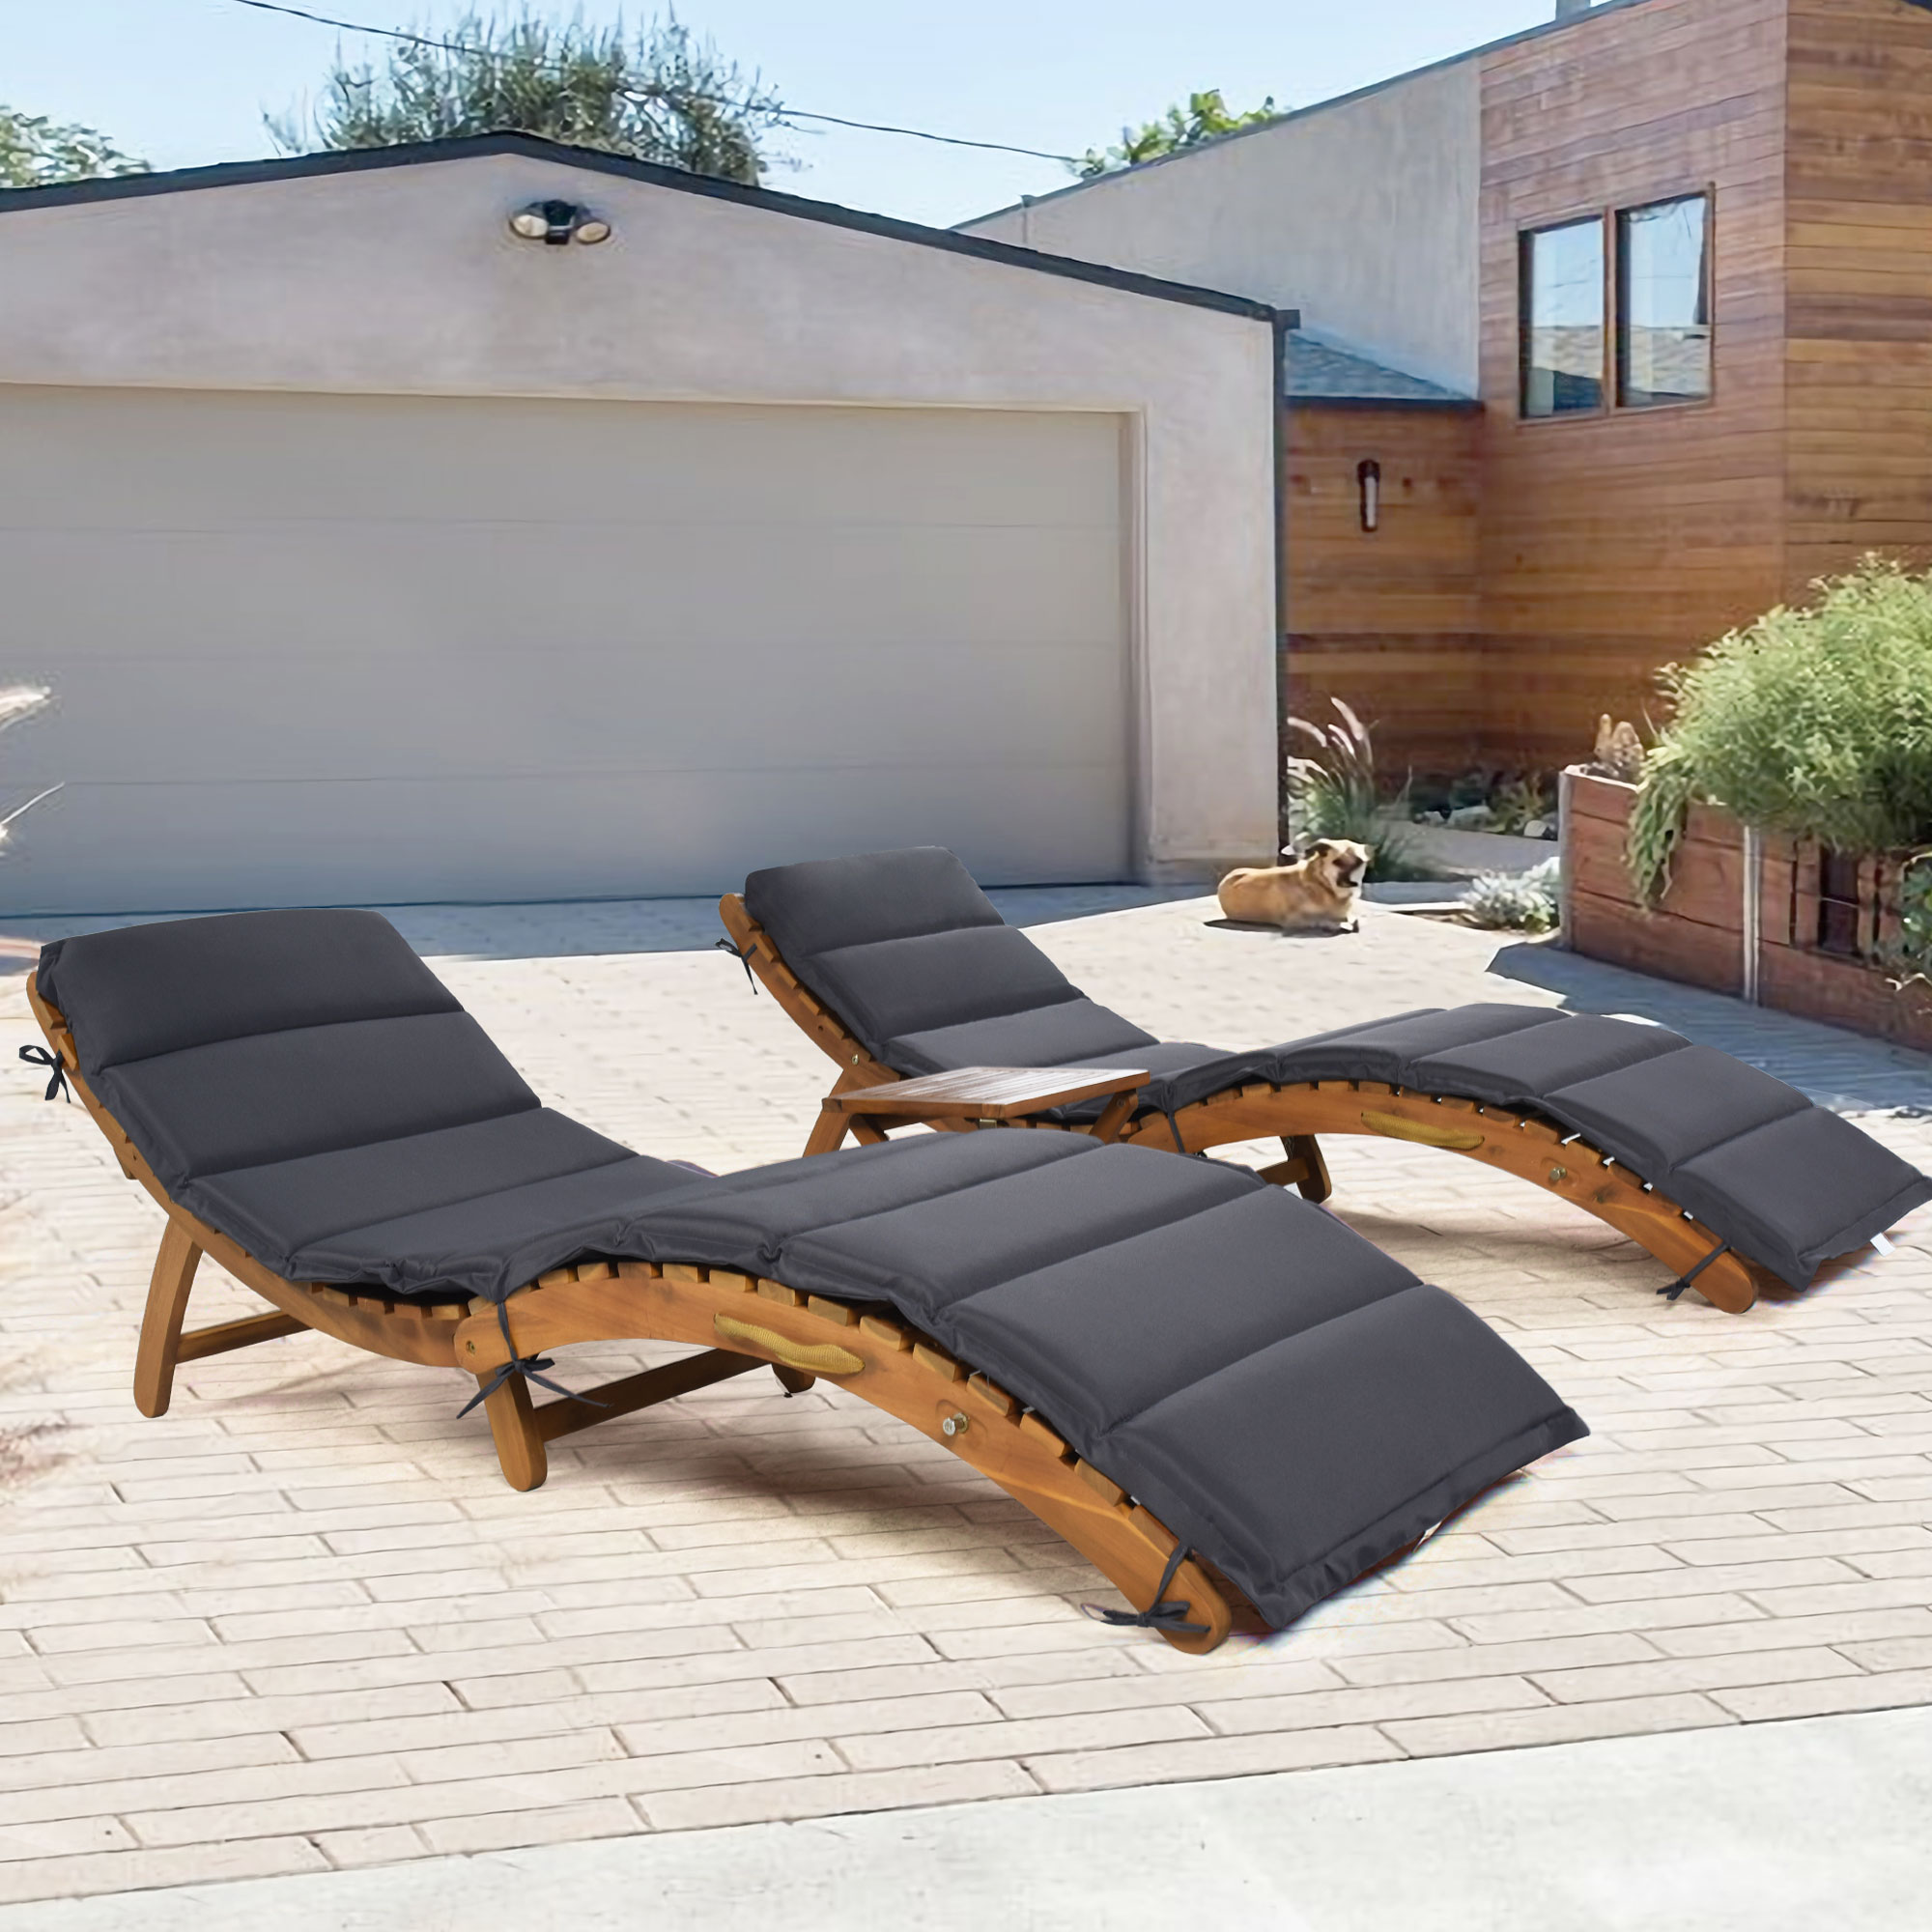 3 Pieces Outdoor Chaise Lounge Set, Wood Patio Furniture Set Extended, 2 Foldable Chaise Lounge Chair with 1 Table, Sun Lounger for Poolside Beach Patio, Brown Lounger + Gray Cushion - image 1 of 9